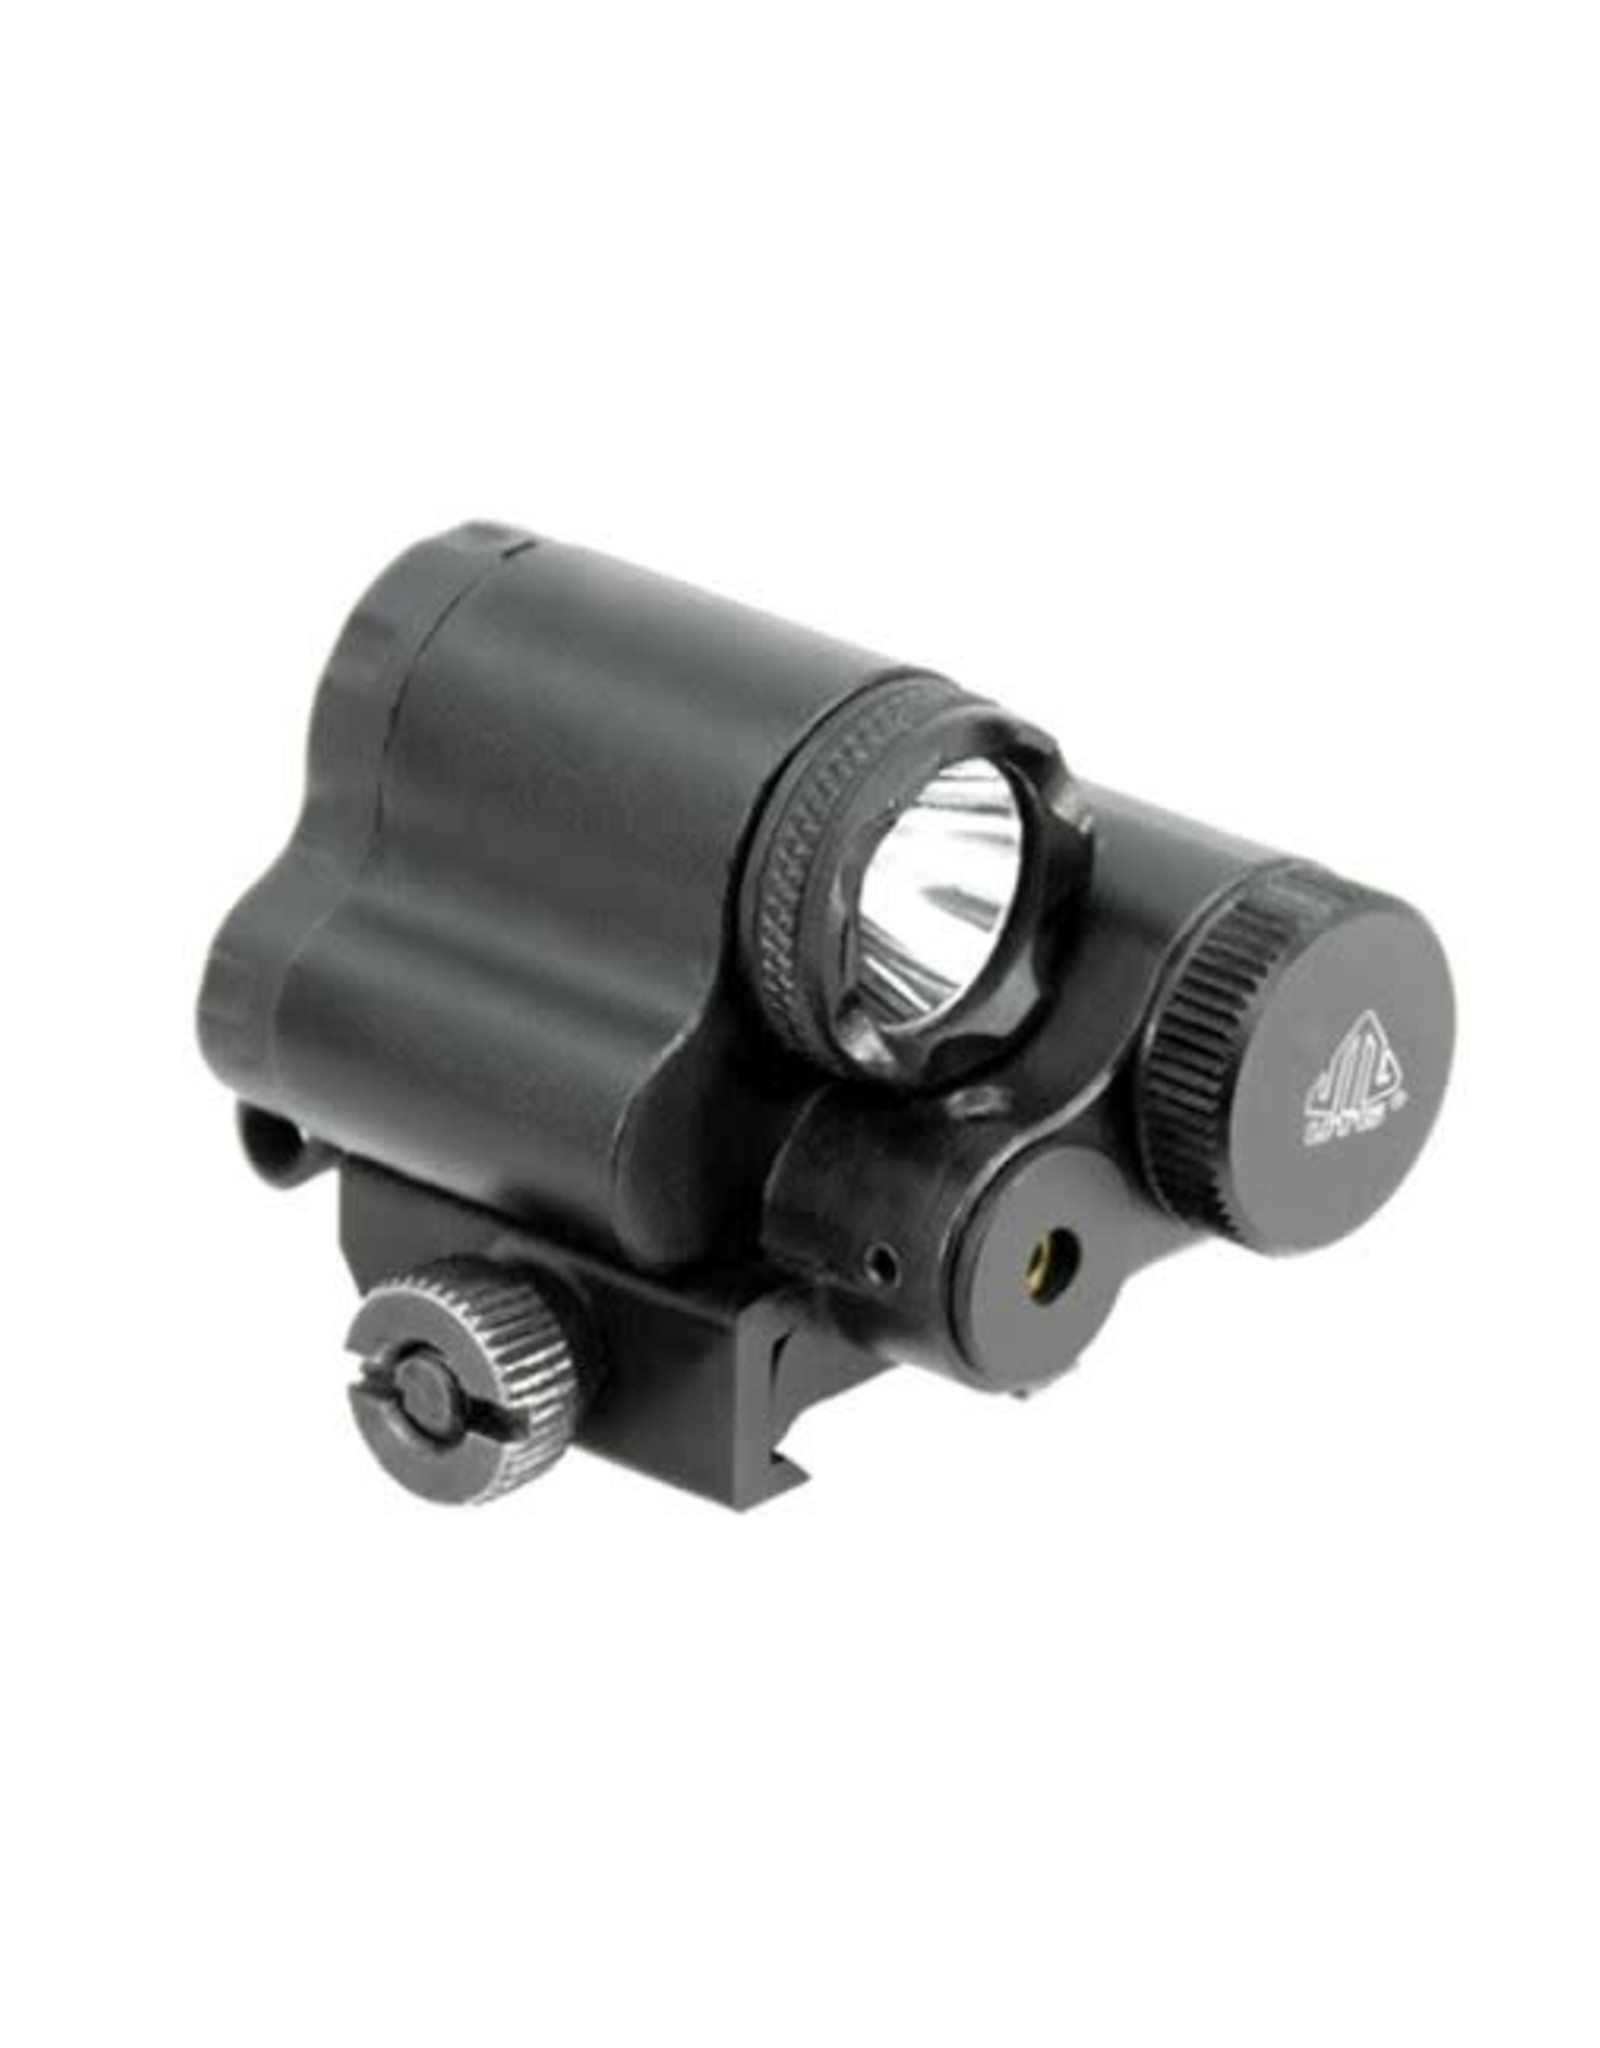 UTG - Leapers UTG Sub-Compact LED Light and Aiming Adjustable Red Laser